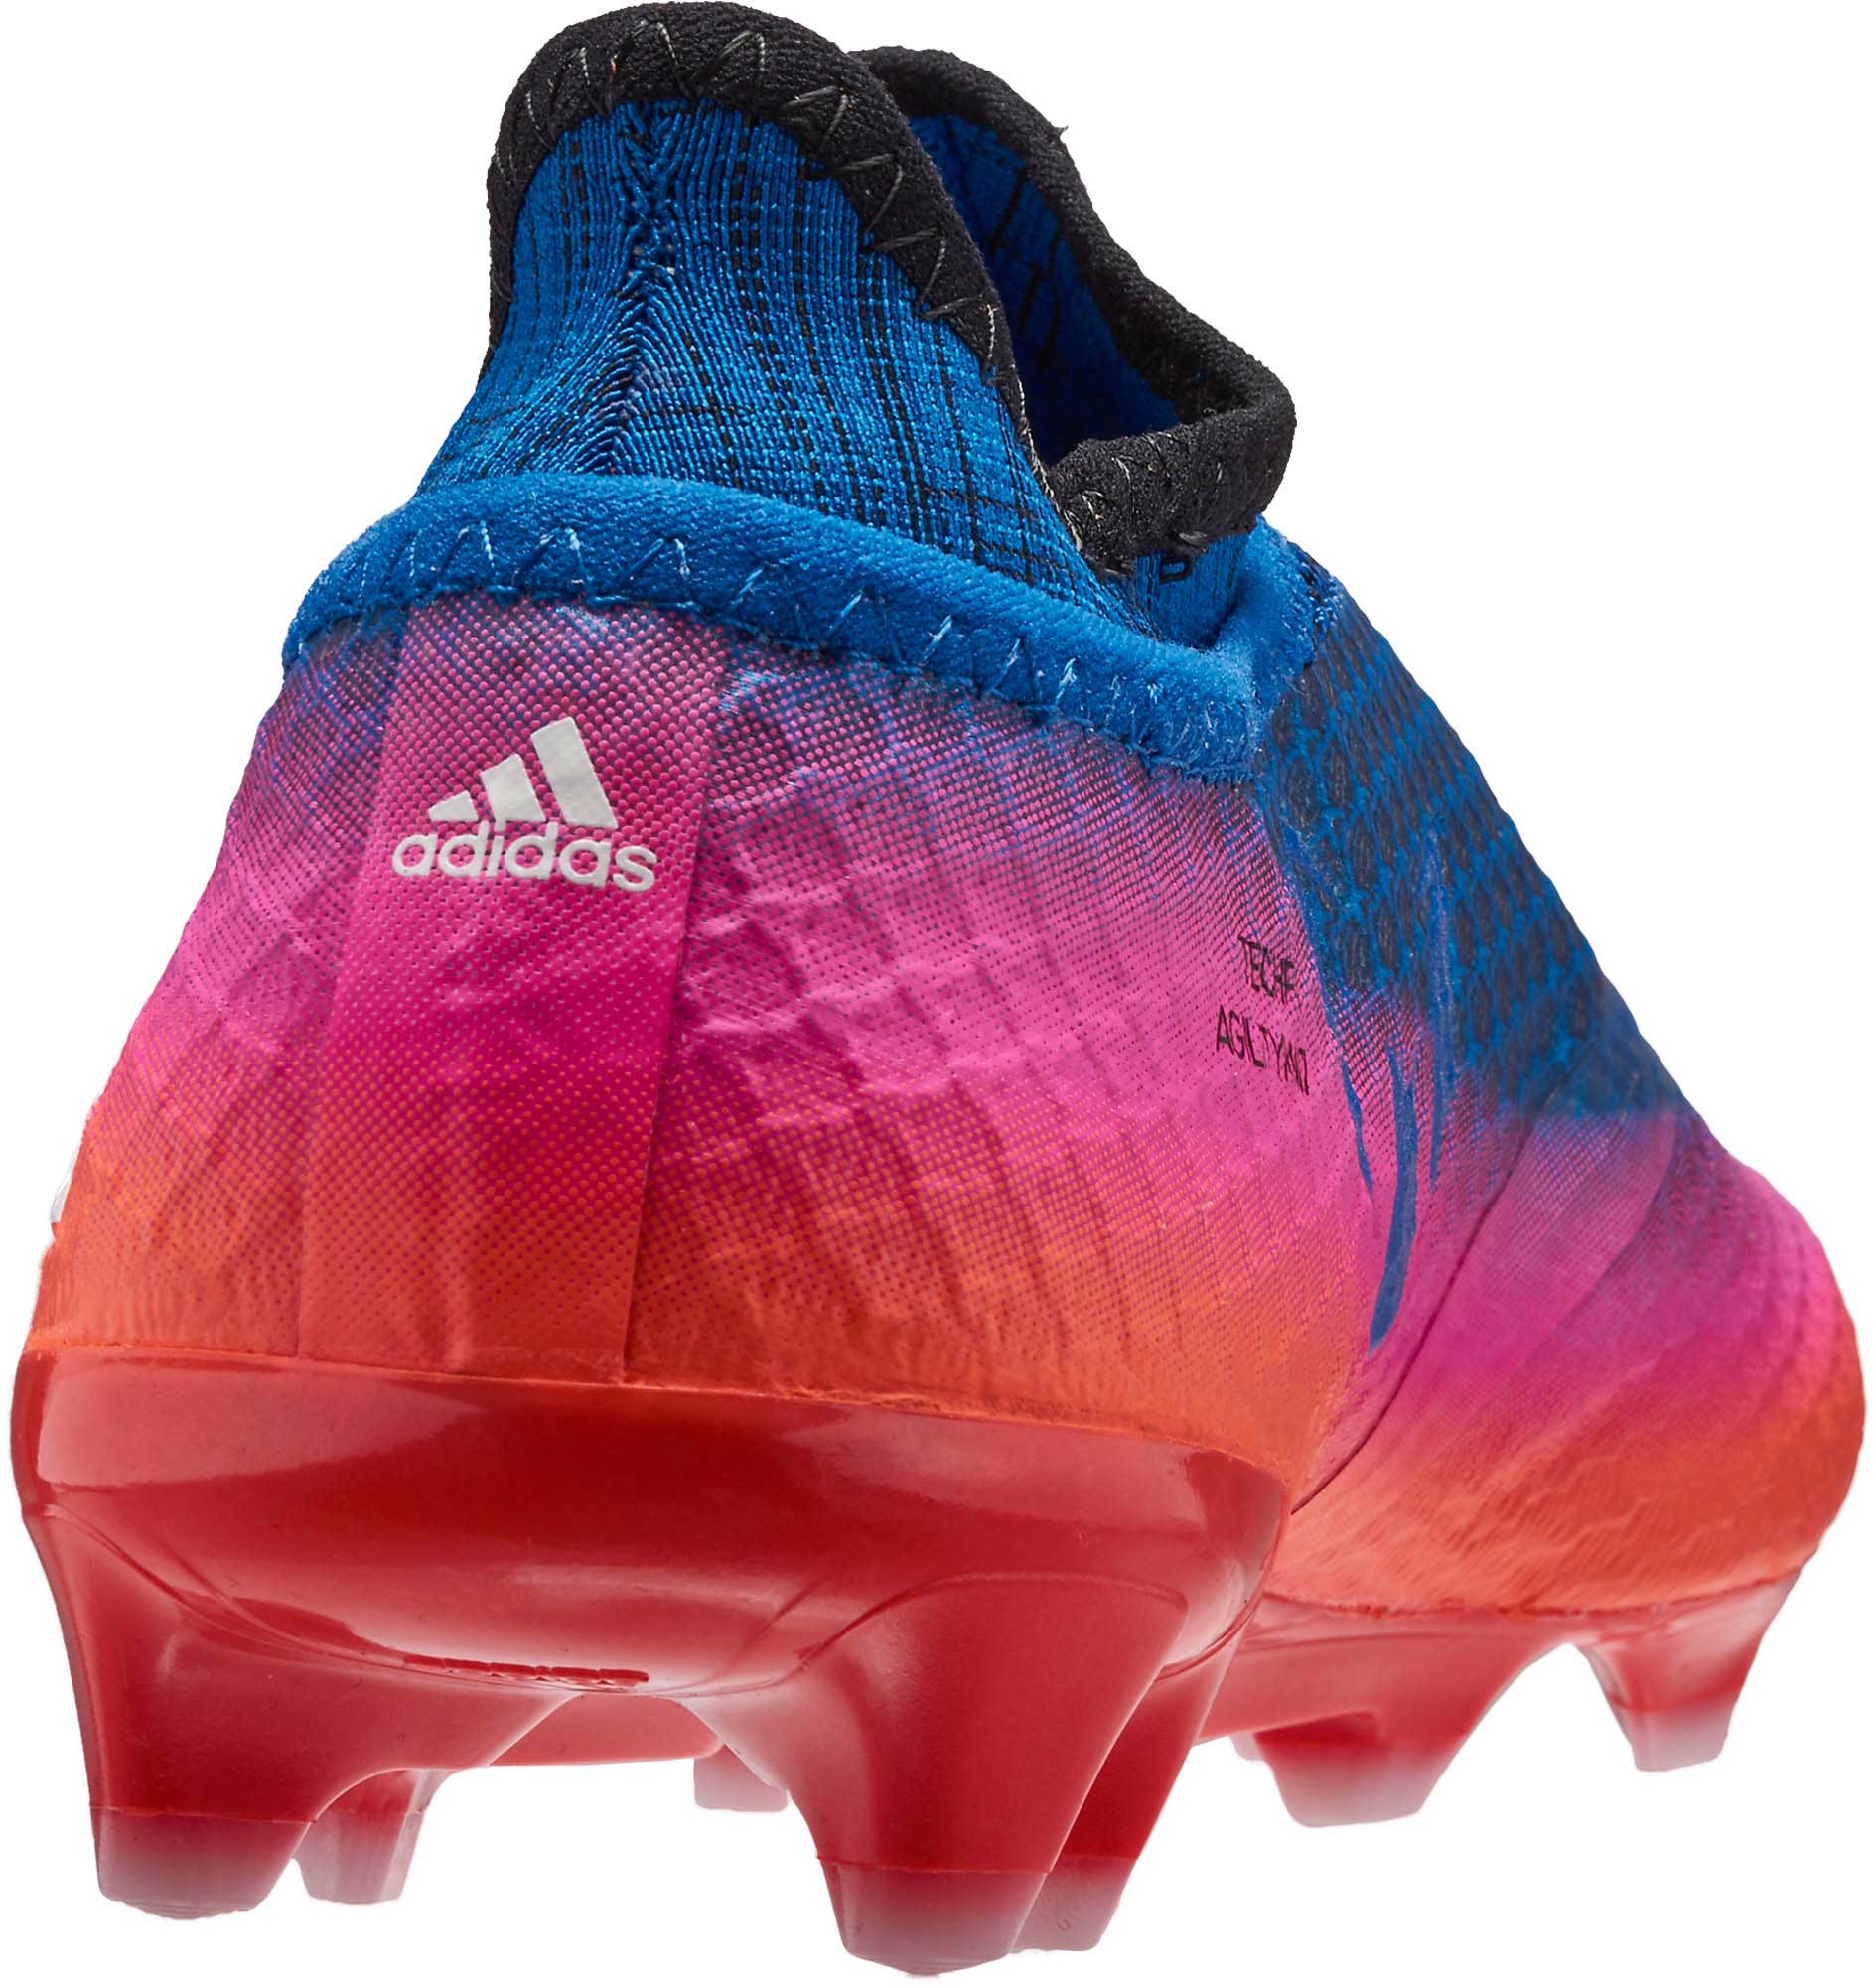 messi soccer cleats for kids